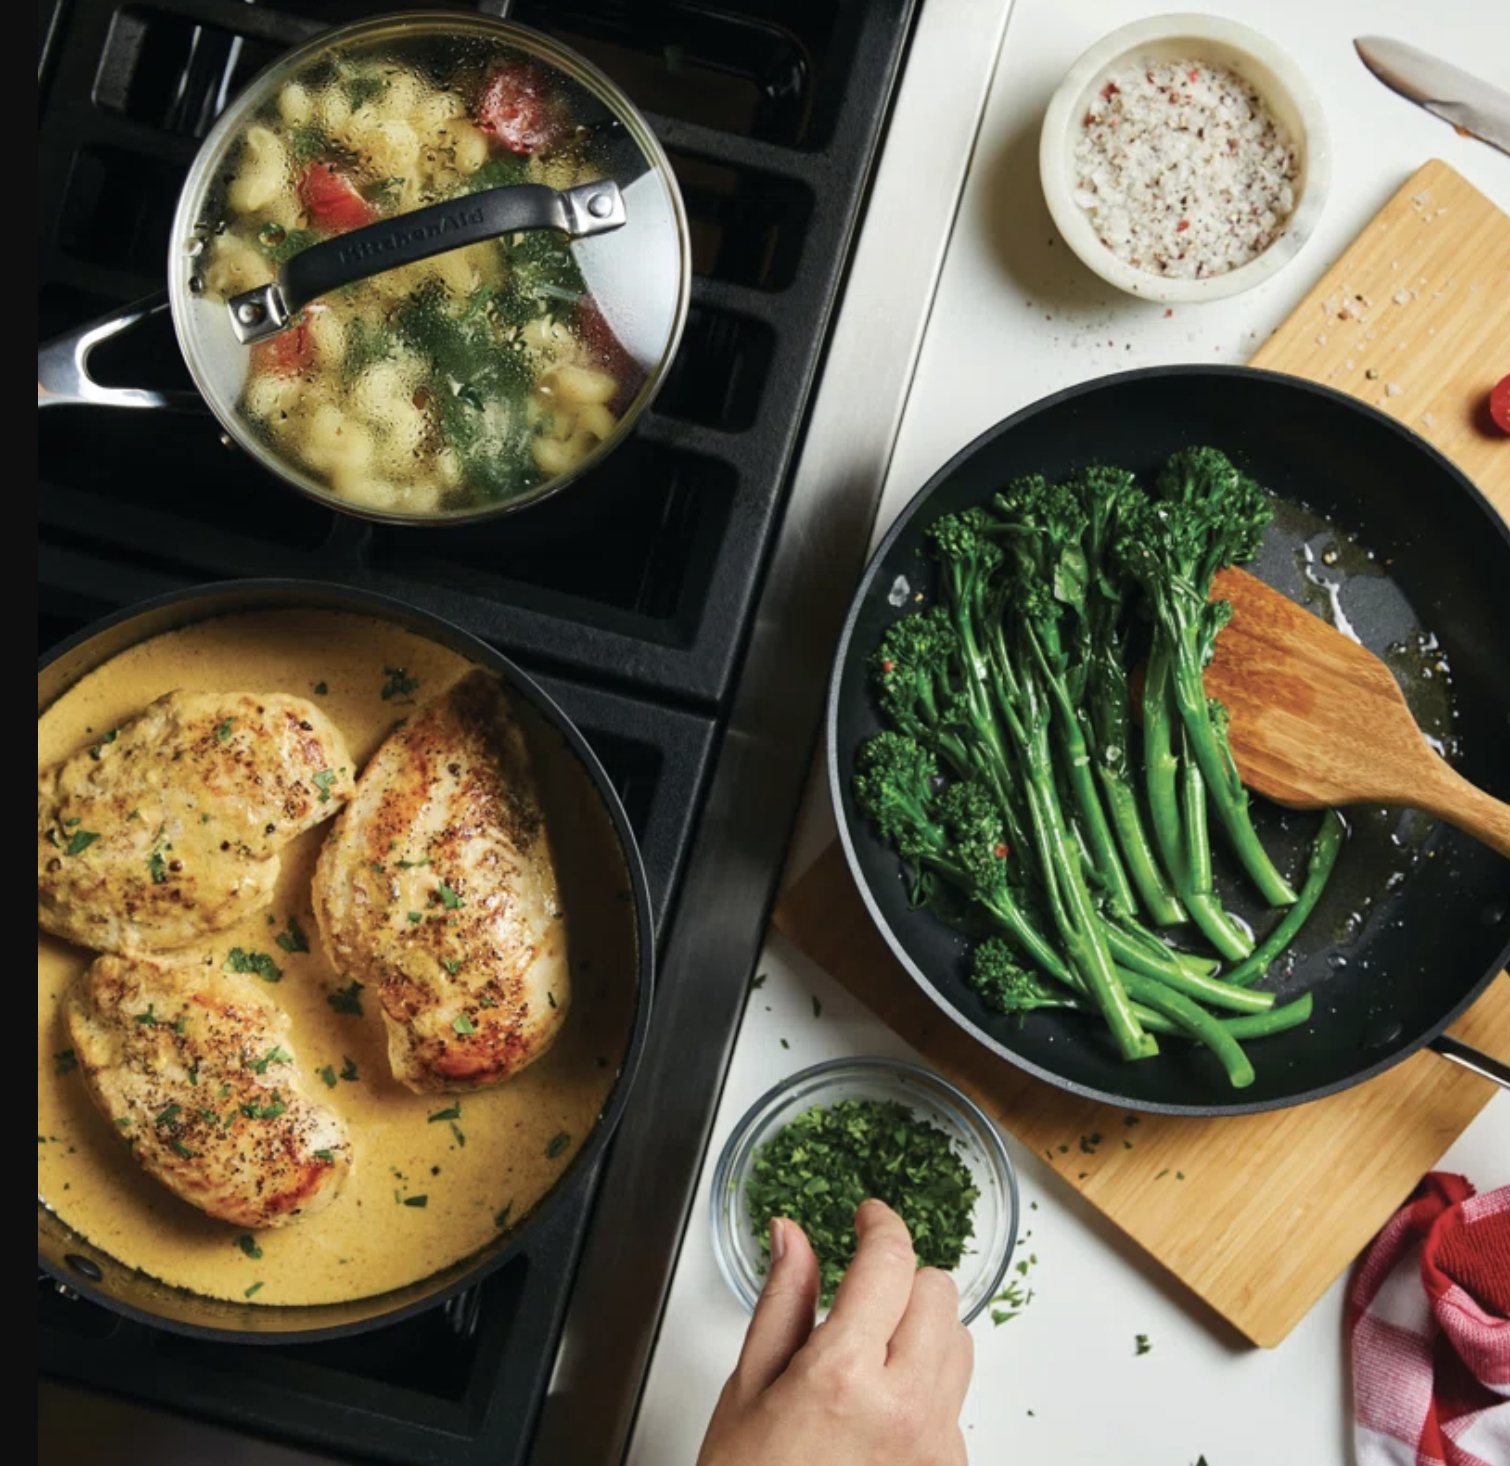 Top-down view of two stovetop pans, one with chicken in sauce, another with sautéed broccoli, next to chopped herbs and seasonings